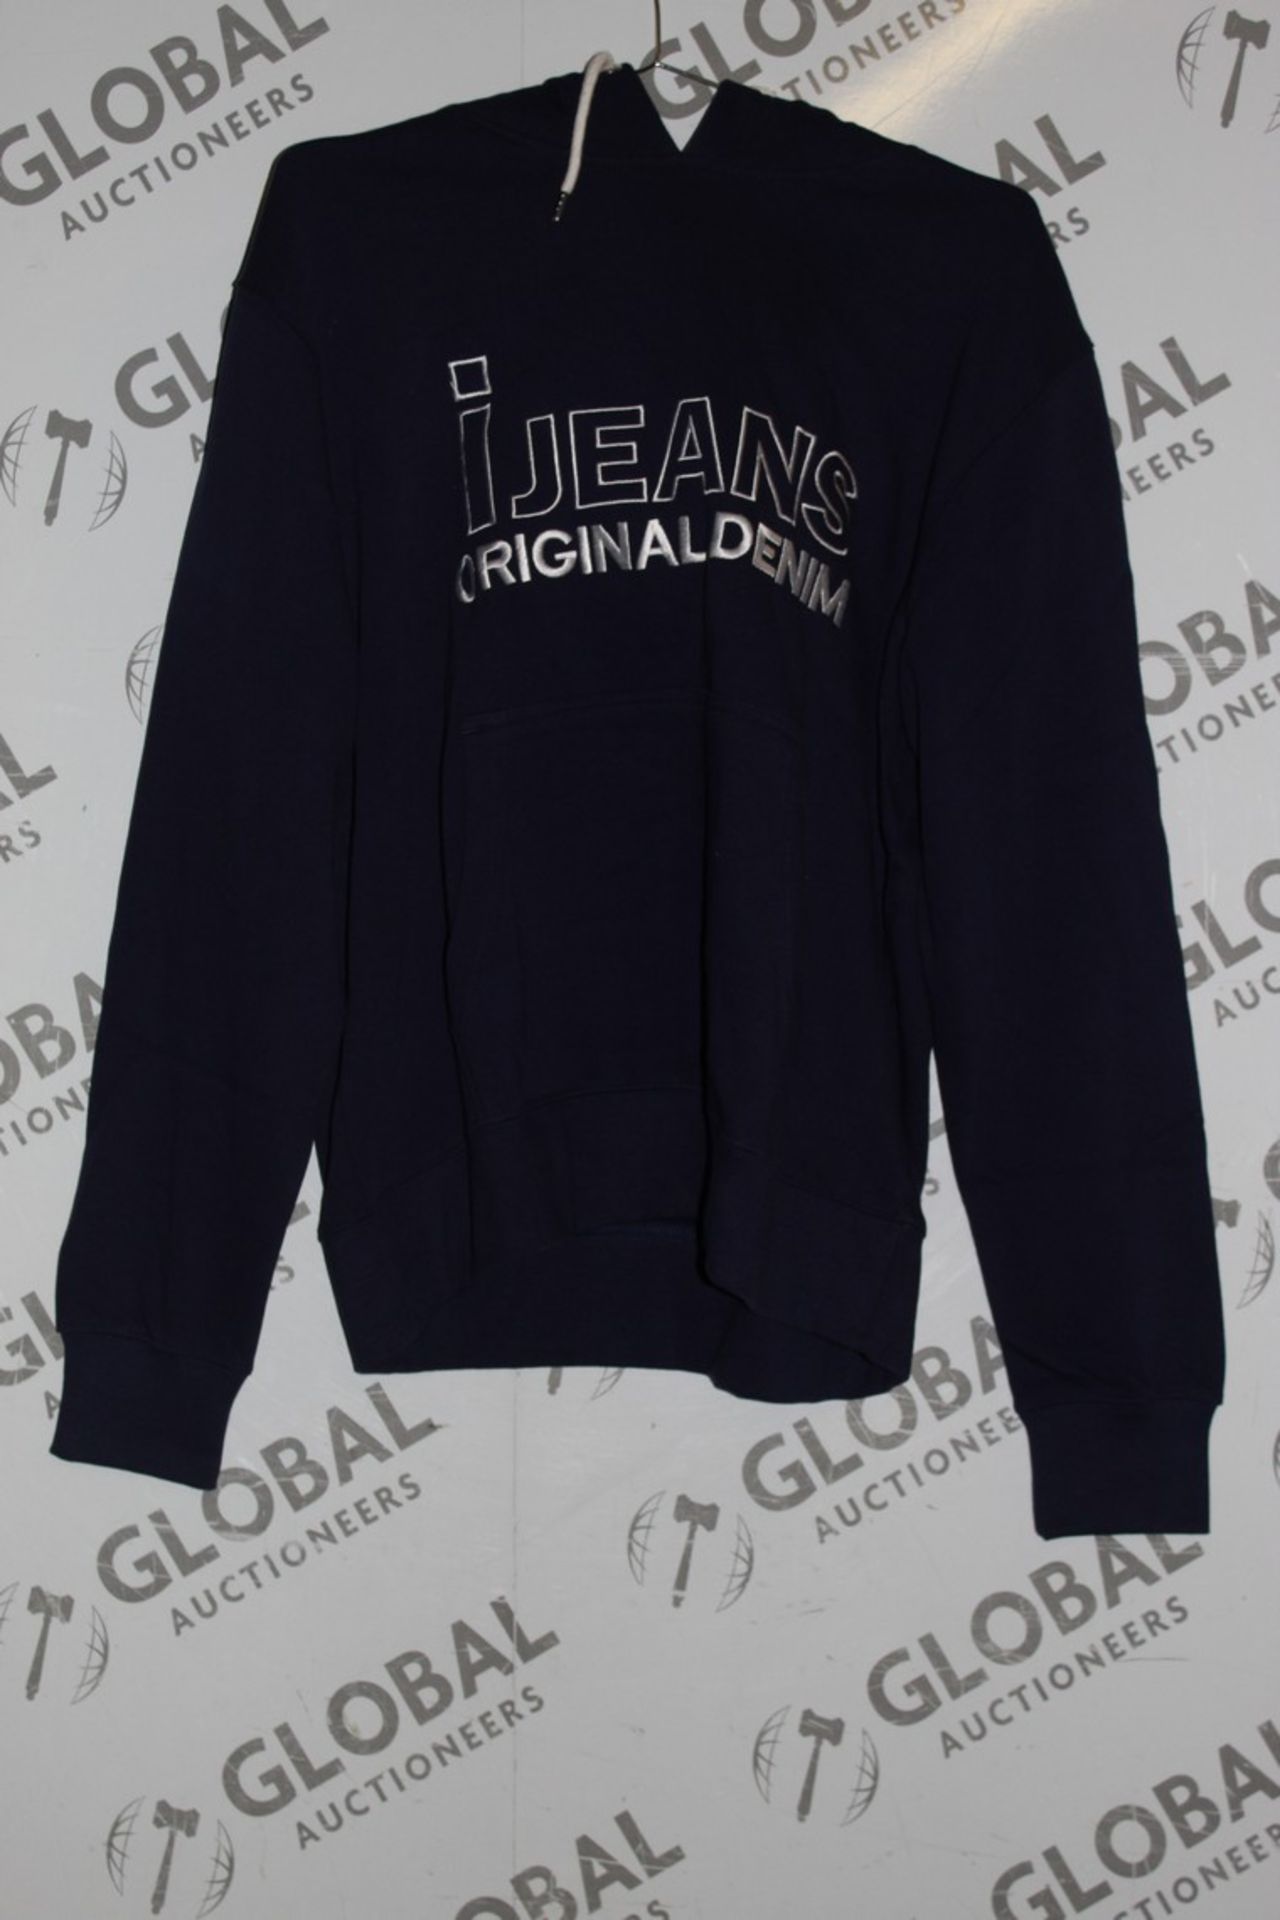 Lot to Contain 13 Brand New Ijeans Original Denim Navy Blue Unisex Hooded Tops RRP £25.99 Each